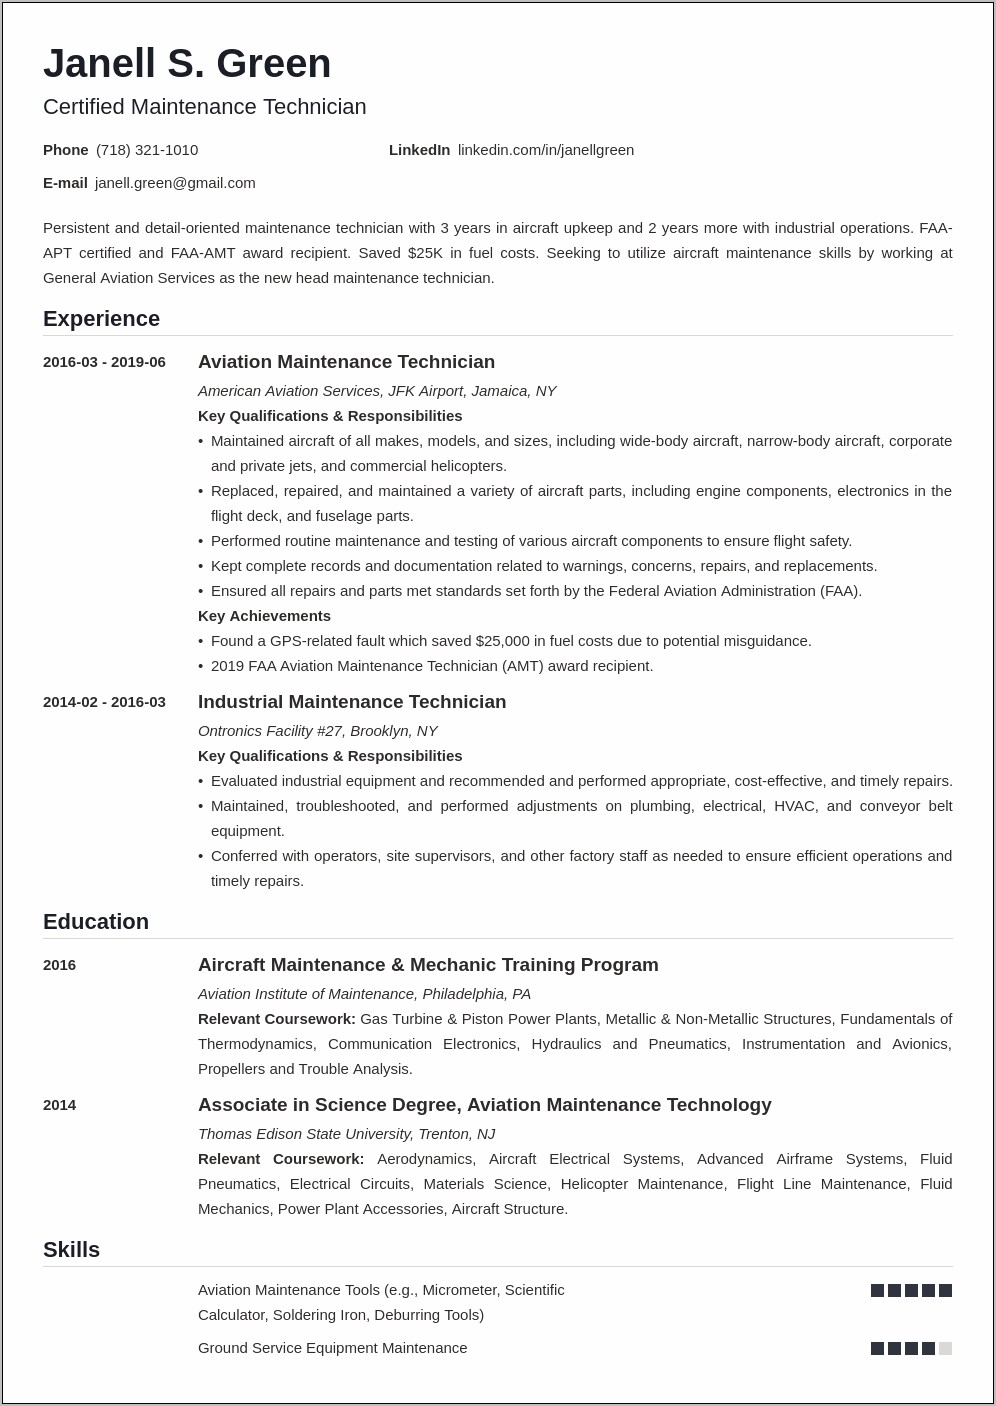 Sample Resume For Security System Technician